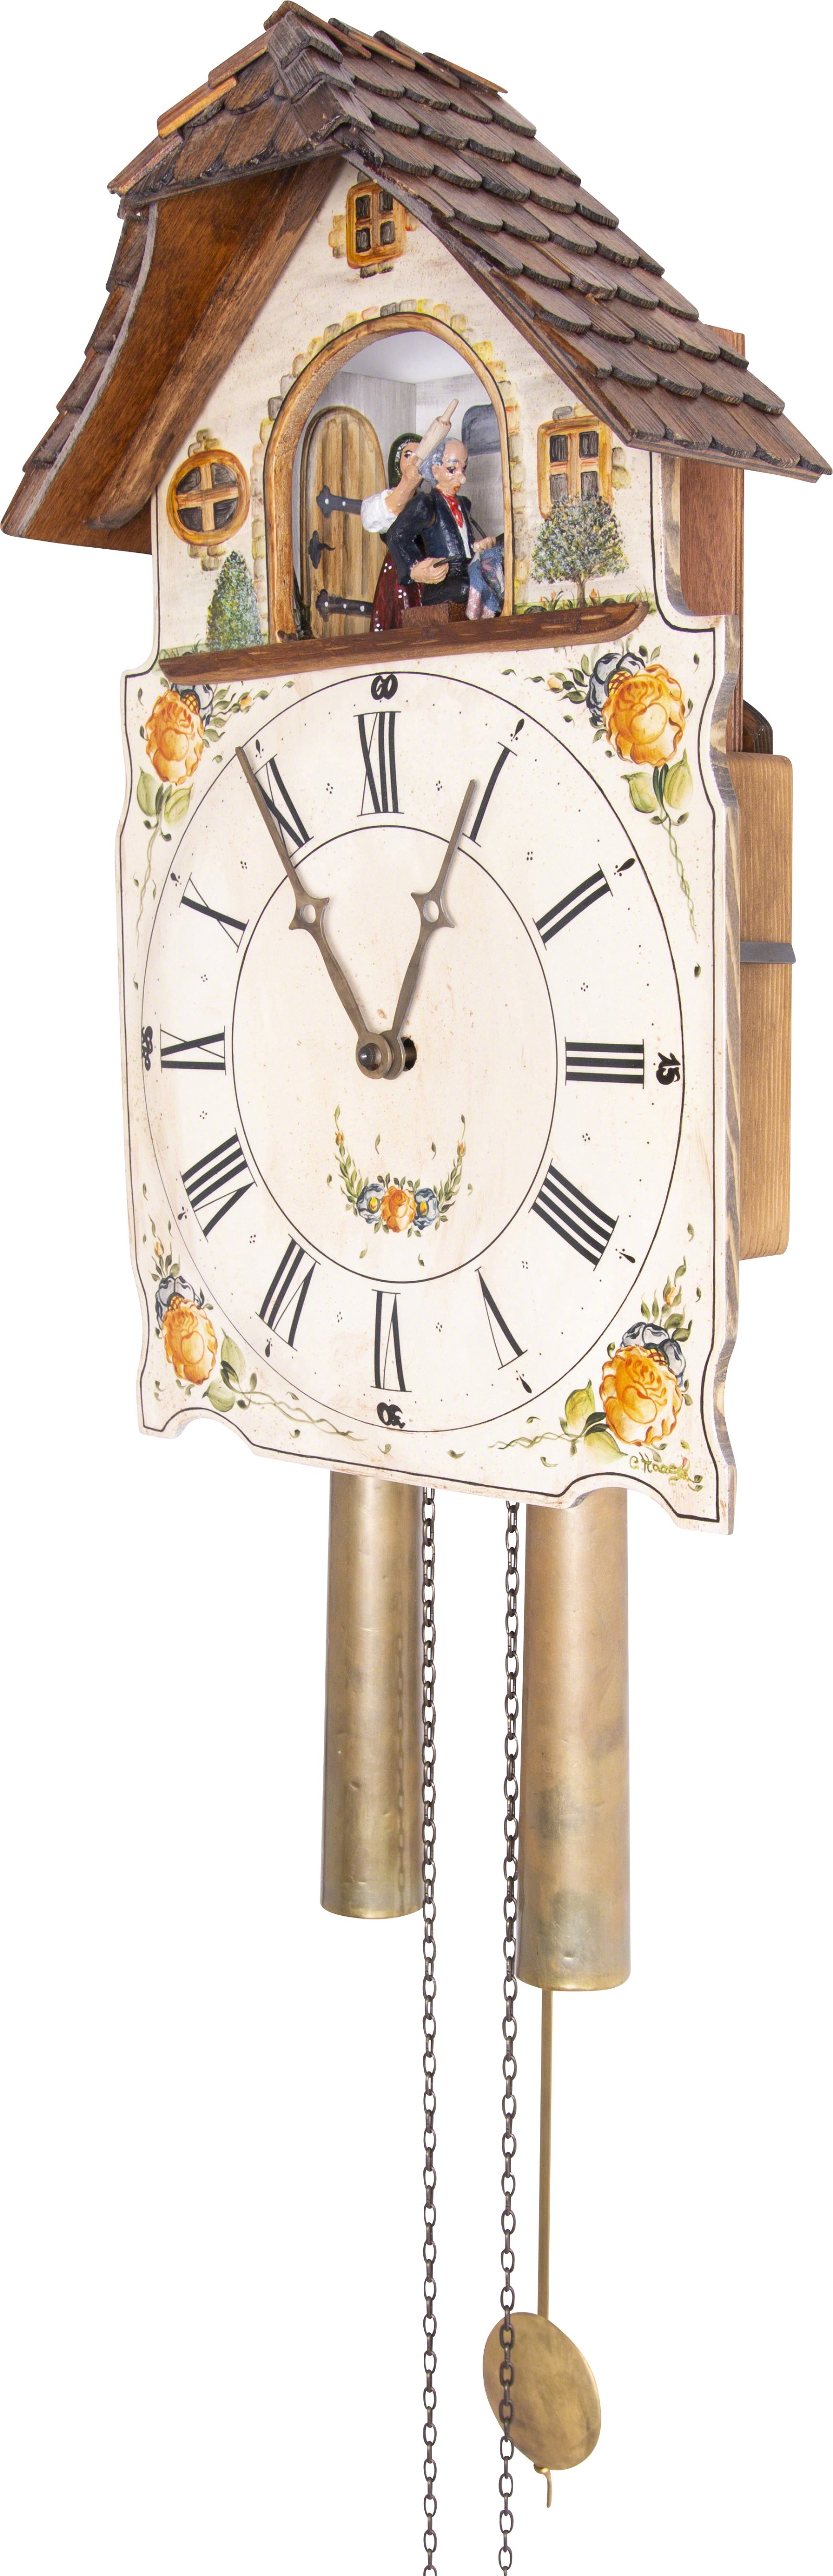 Shield Clock 8 Day Movement 40cm by Rombach & Haas